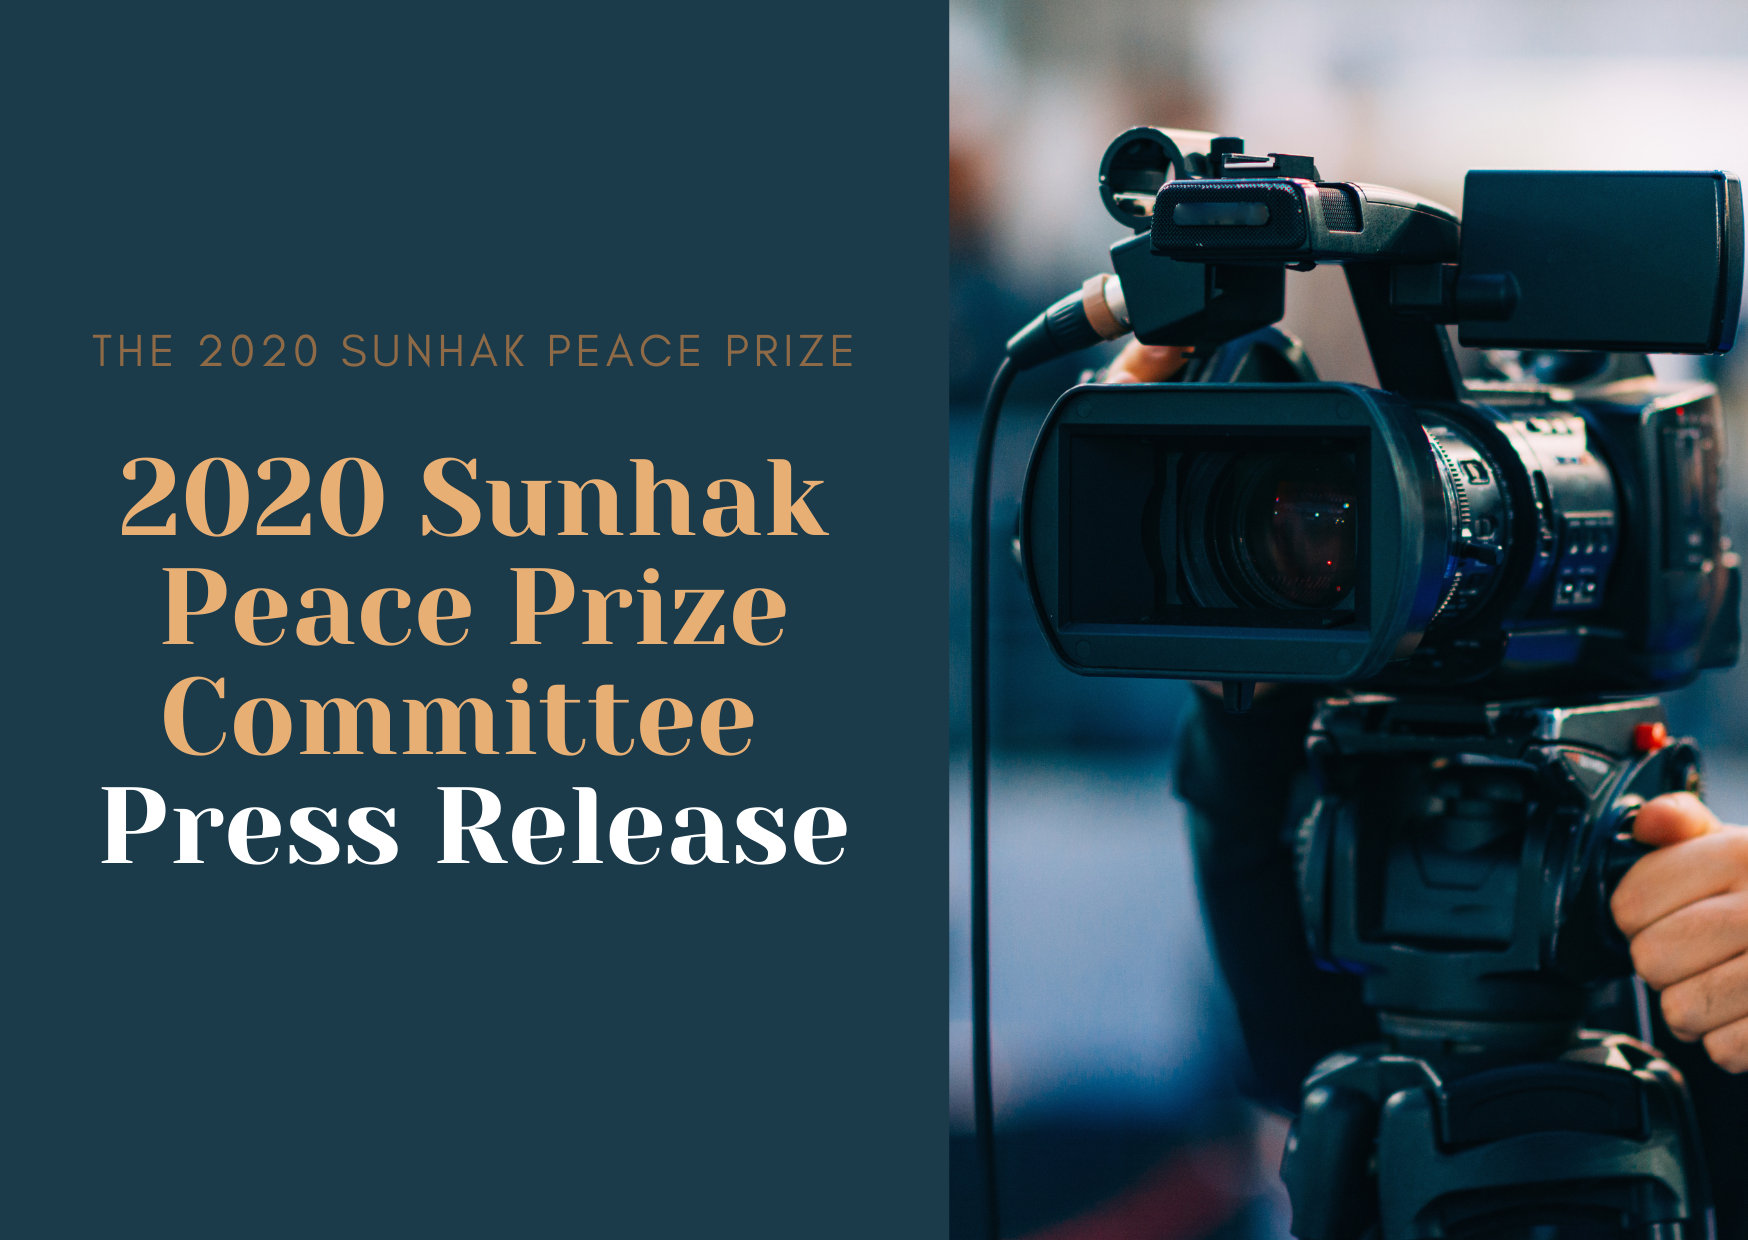 2020 Sunhak Peace Prize Committee Press Release 썸네일